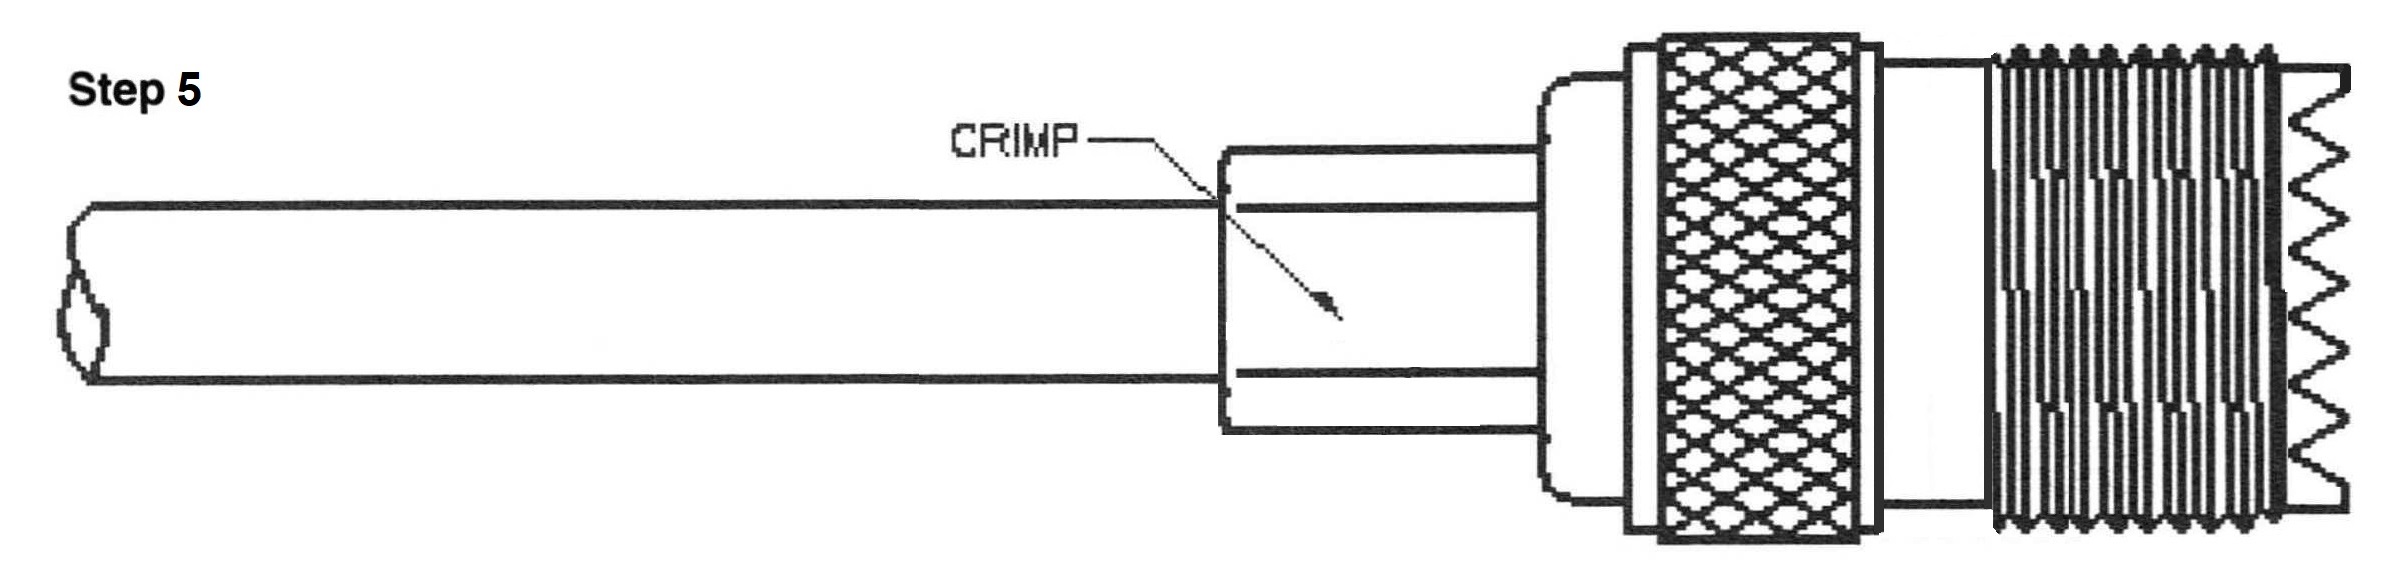 UHF female Crimp On for RG-58, LMR-195 7506-UHF-58 Installation Guide Step 5 - Max-Gain Systems, Inc.